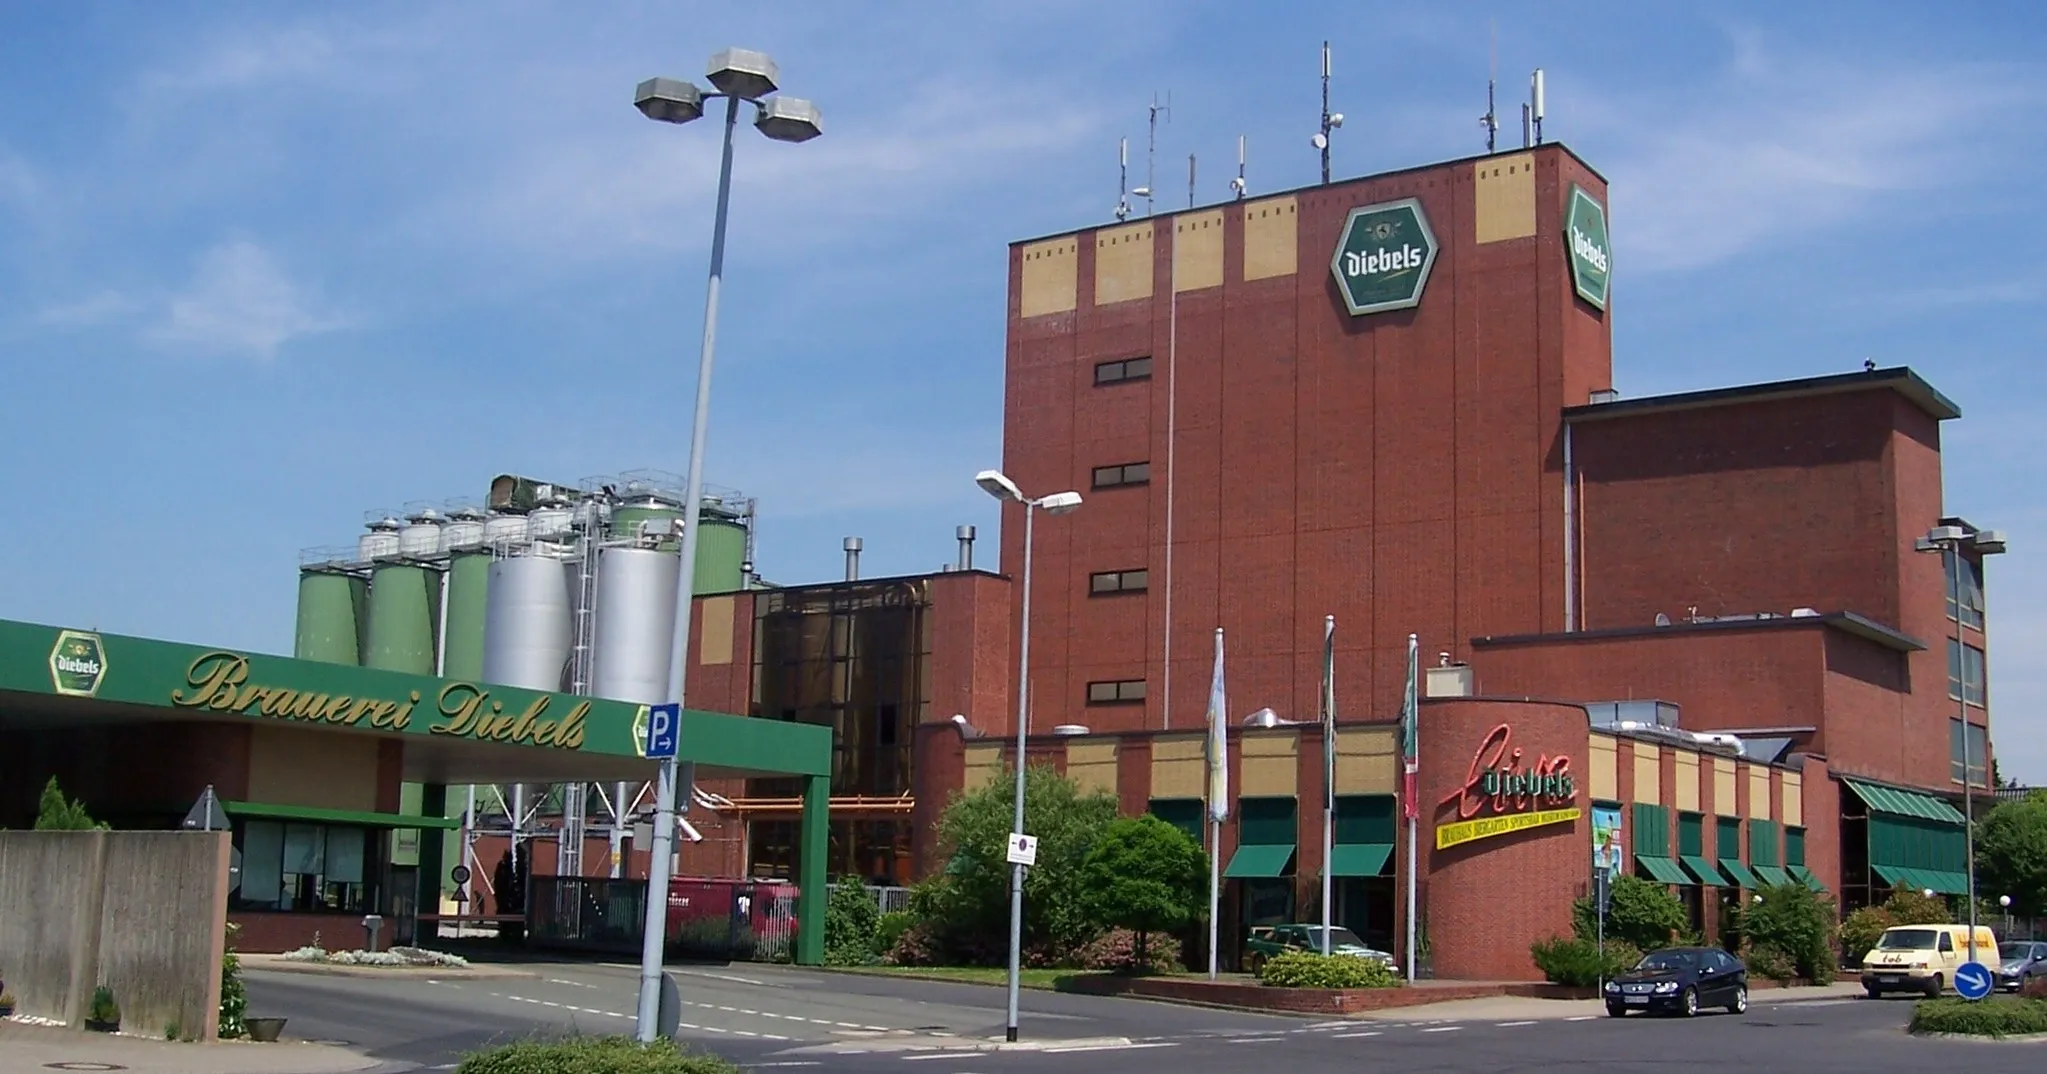 Photo showing: The Diebels brewery in Issum, Germany.